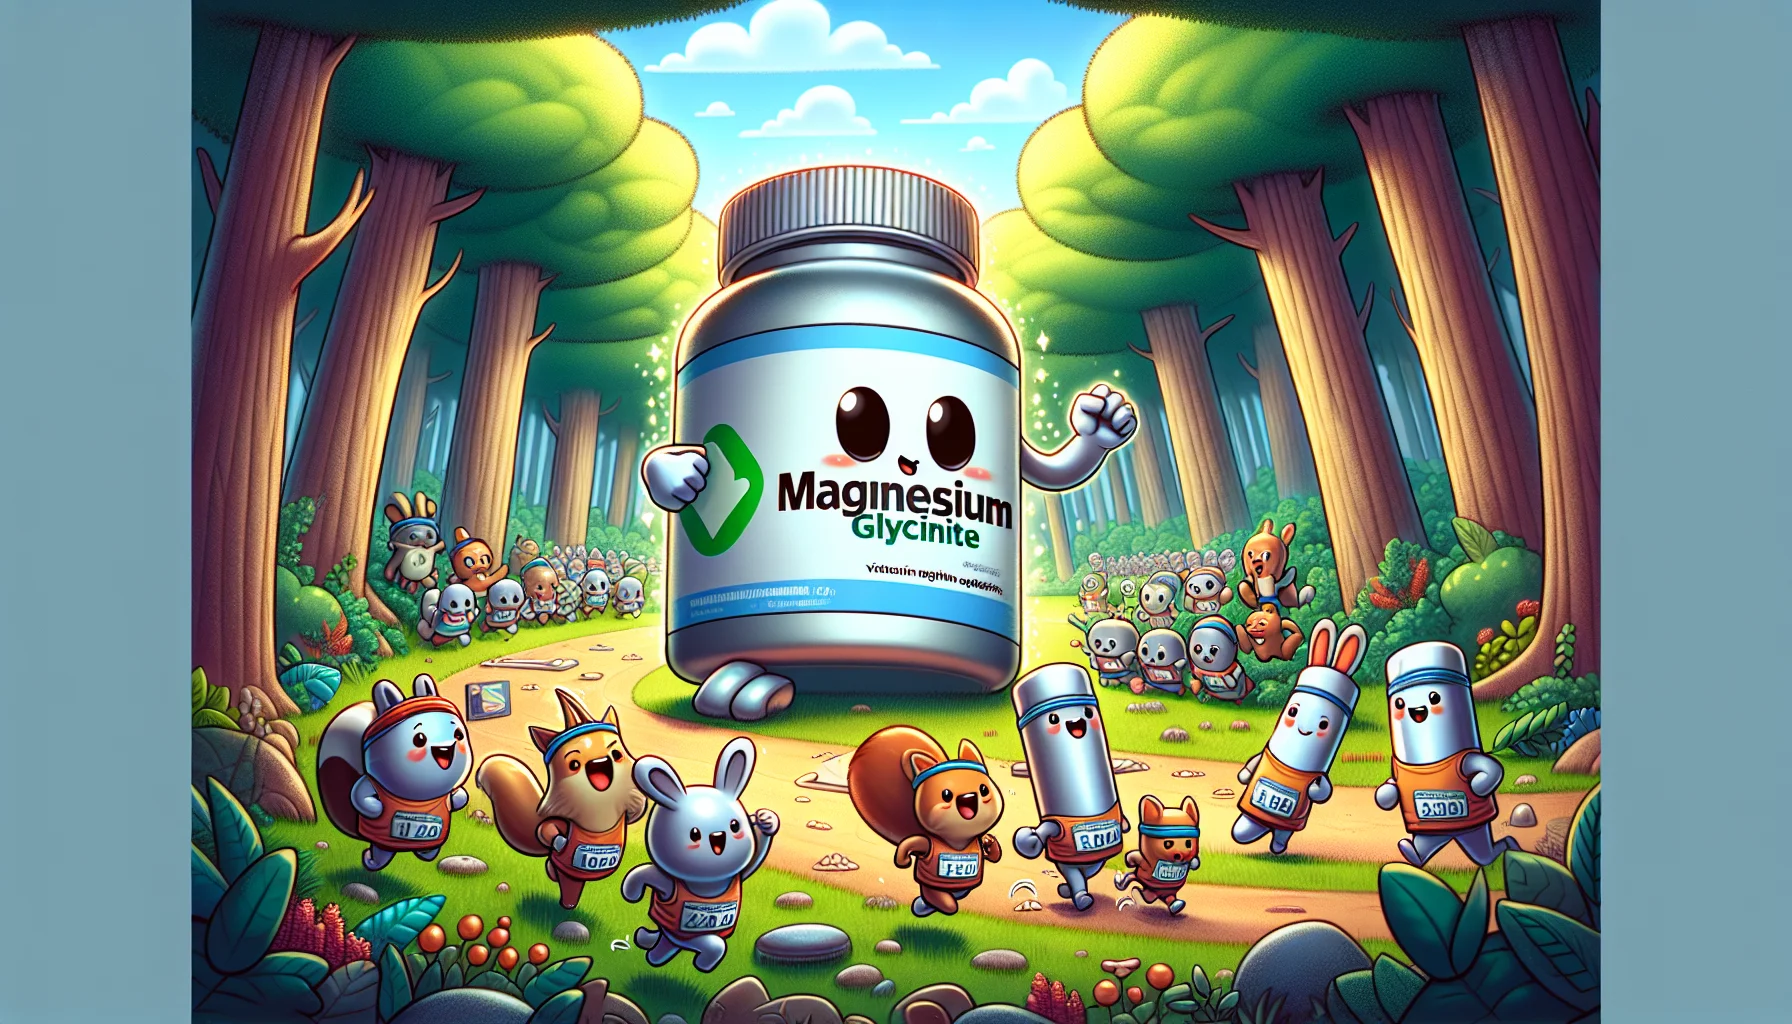 Illustrate a humorous scene in a grand forest, nature's lush bounty around, where a colossal package of Magnesium Glycinate supplement is standing upright. A family of anthropomorphic vitamin bottles, dressed in cute sports gear, are enthusiastically organizing a marathon around it. Nearby, some forest animals, like squirrels and rabbits, are participating in the race, with tiny sweat bands and excited expressions. Emphasize the cartoon-like exaggeration of the animals' sporting efforts and the size of the supplement bottle. Add some light effects to make the magnesium glycinate bottle look magical and enticing. The scene should convey the message that supplements are beneficial for sports in a funny and appealing manner.